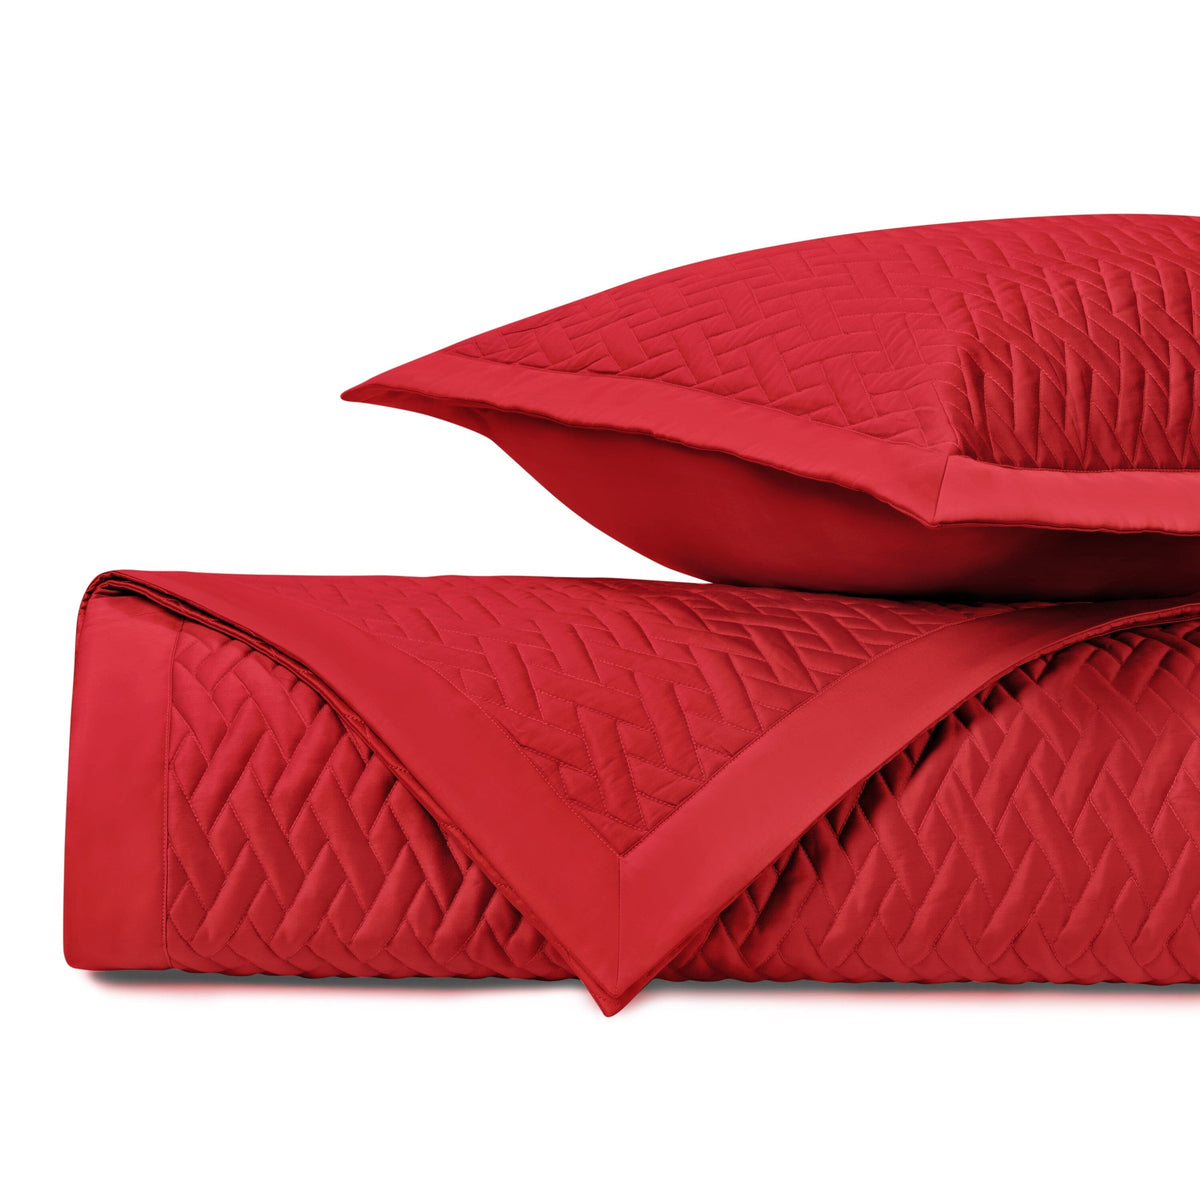 VISCAYA Quilted Coverlet in Bright Red by Home Treasures at Fig Linens and Home